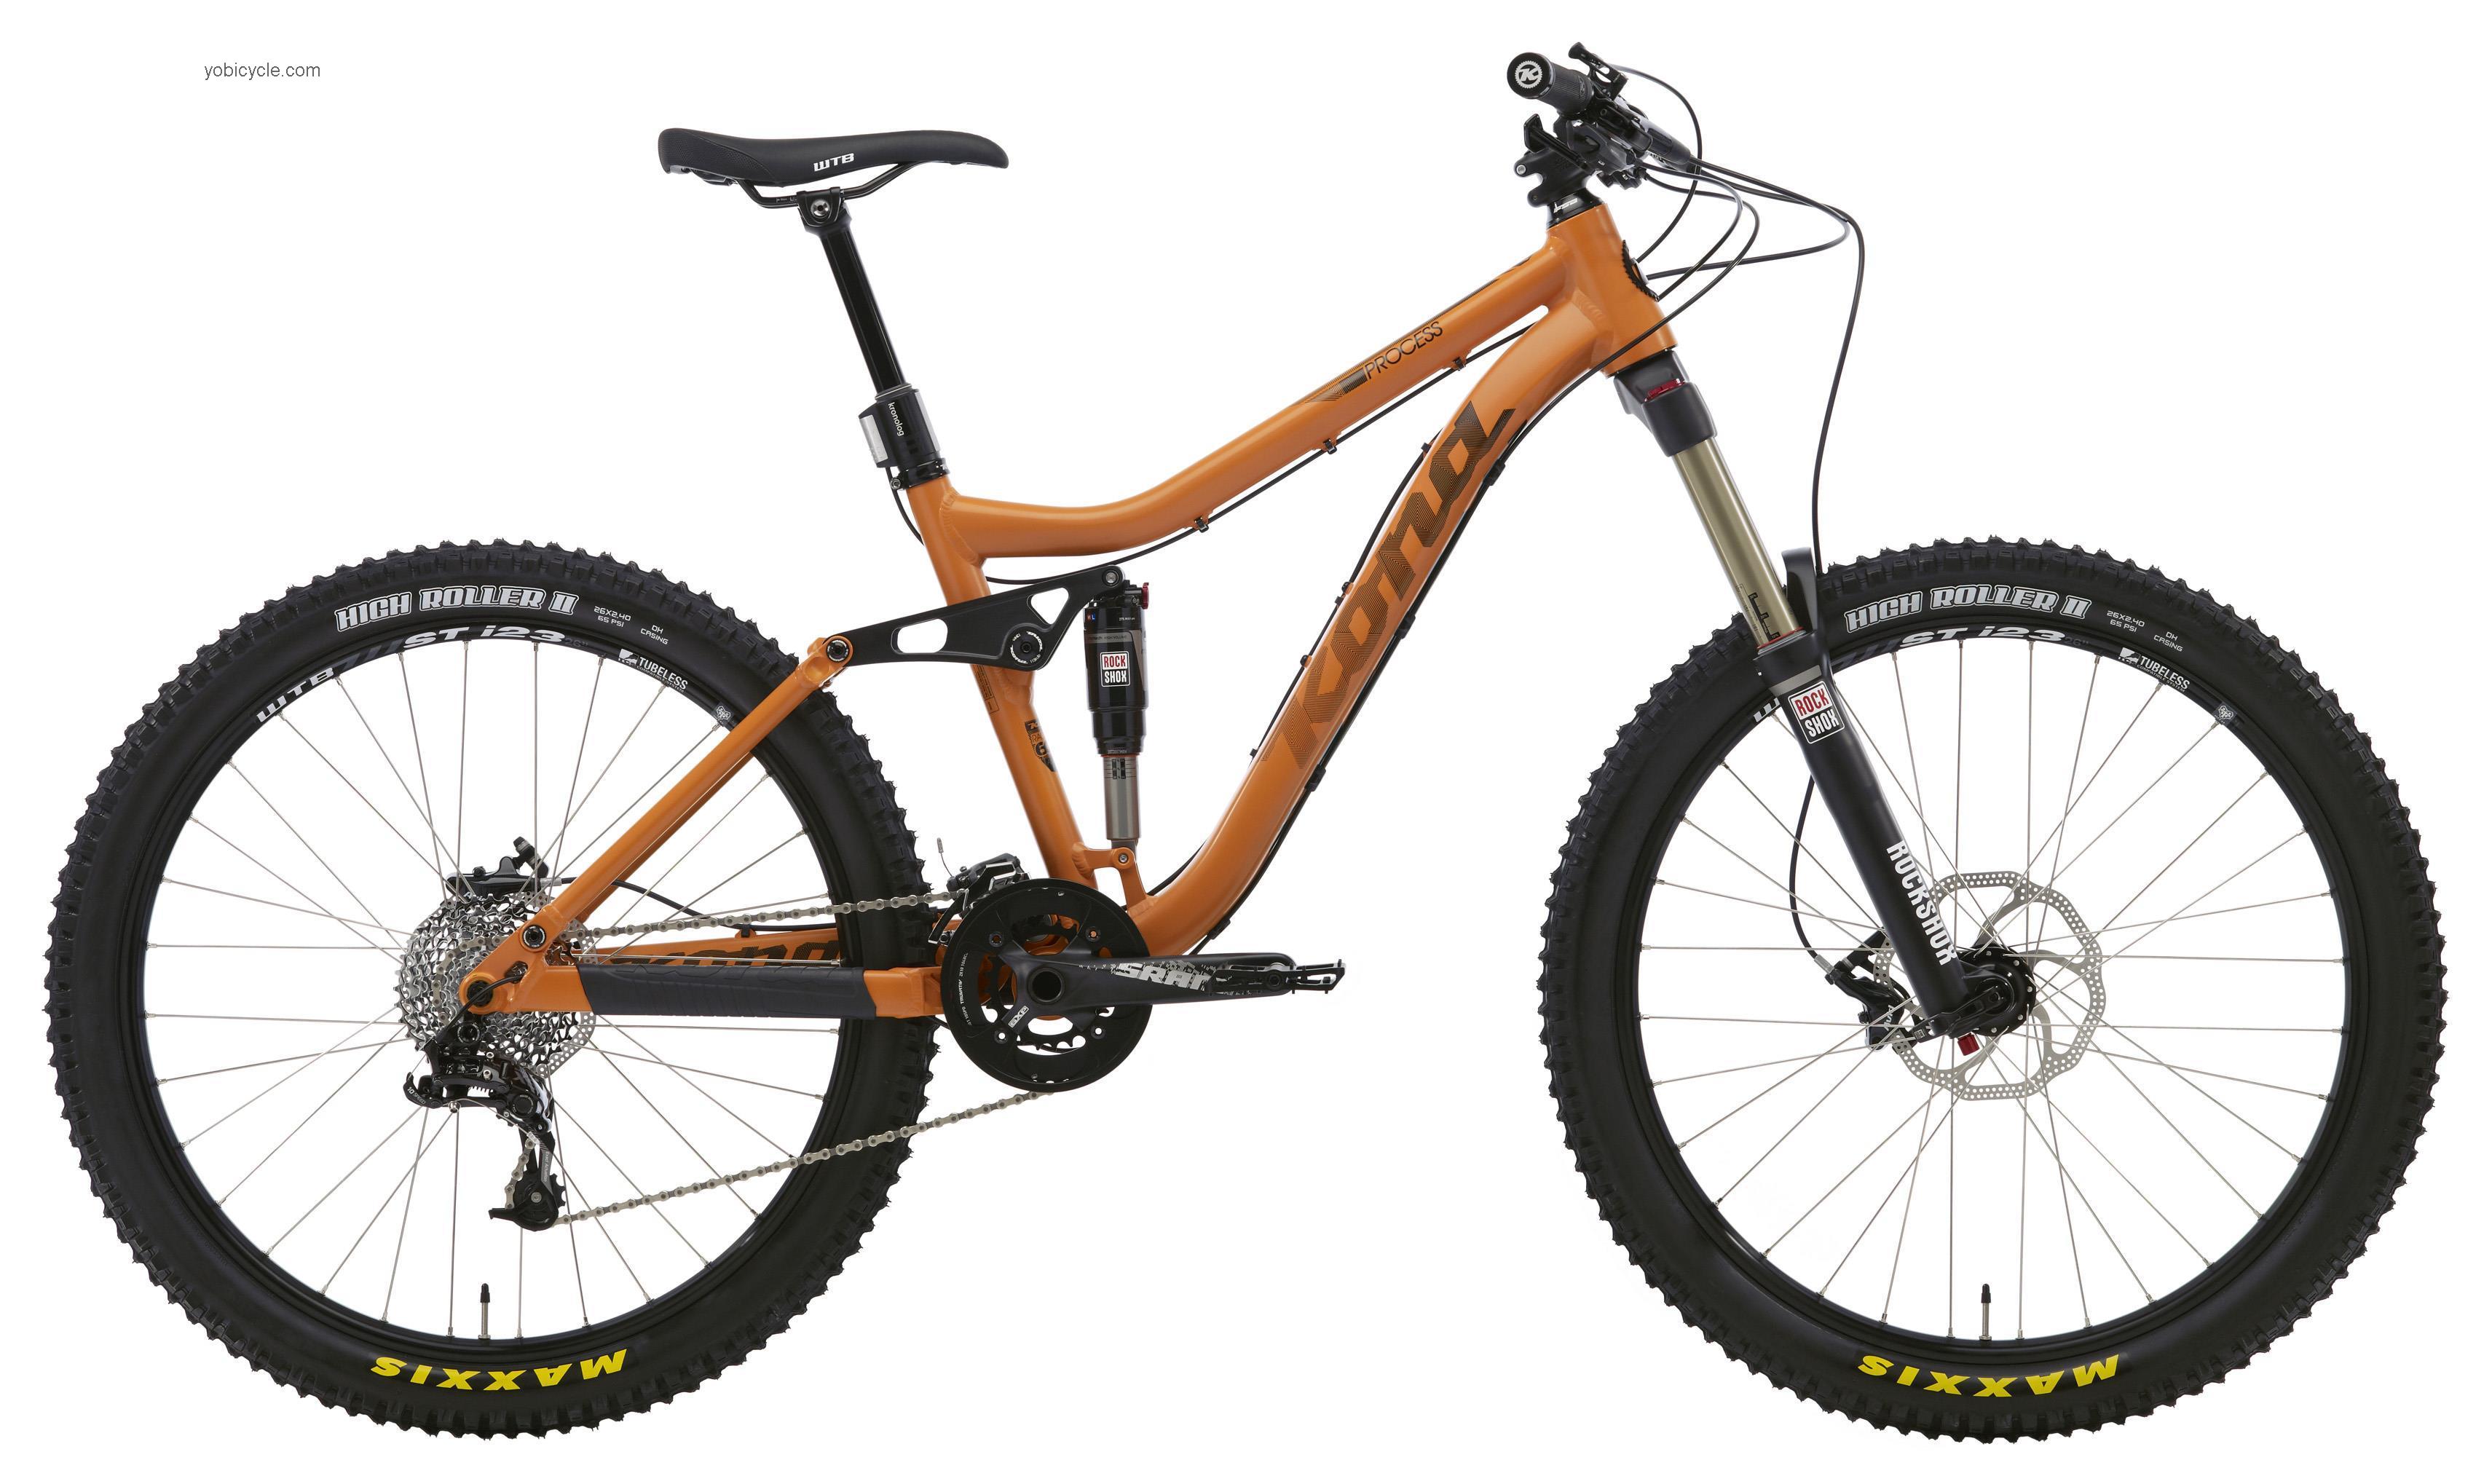 Kona Process competitors and comparison tool online specs and performance